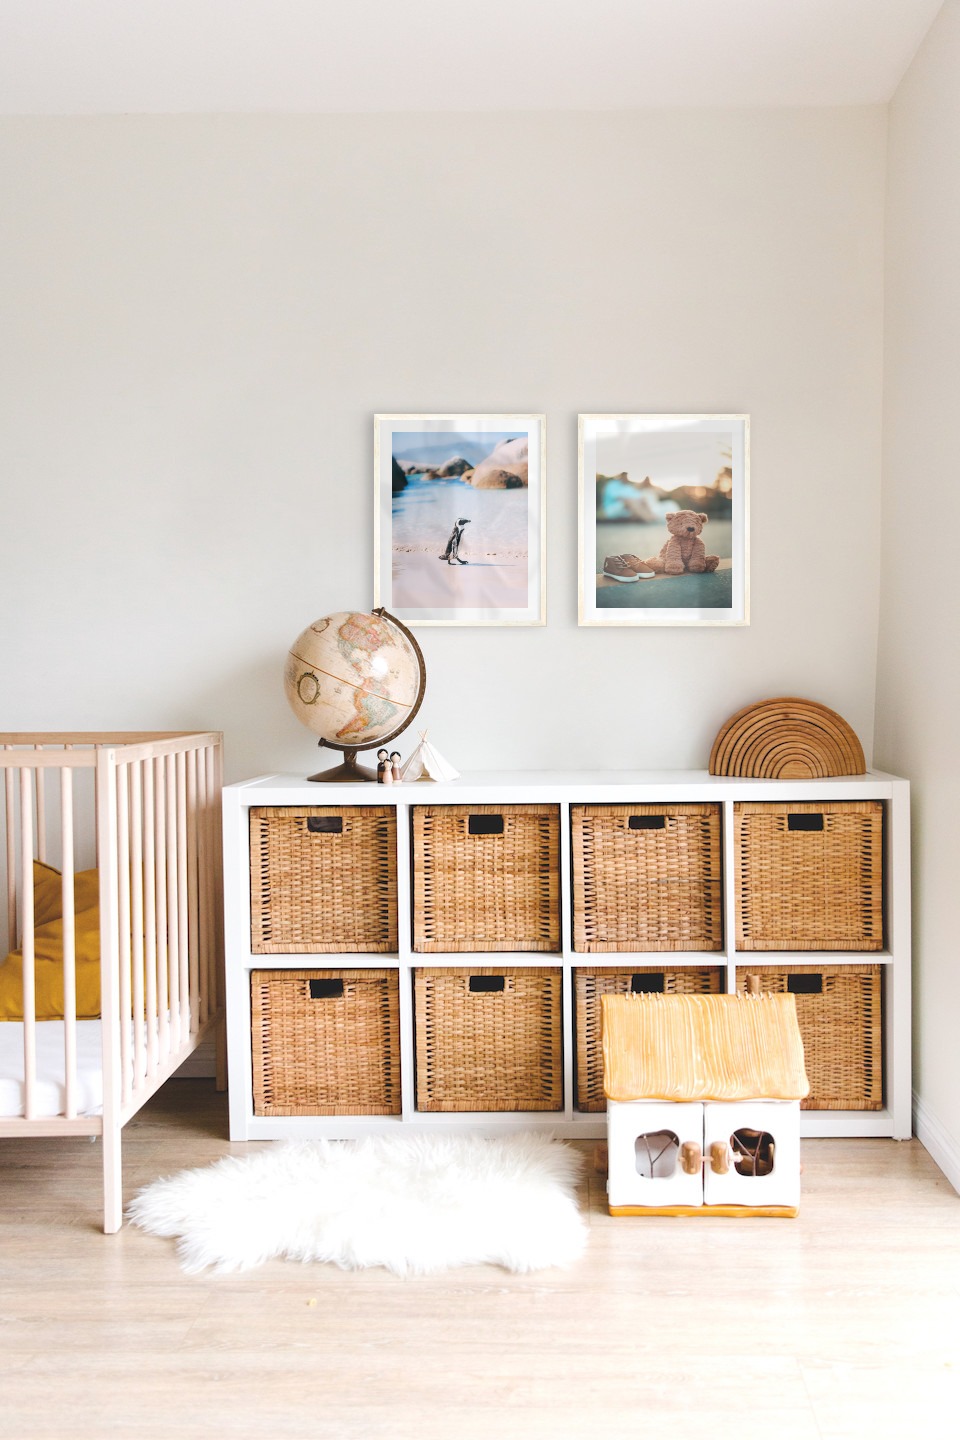 Gallery wall with picture frames in light wood in sizes 40x50 with prints "Penguin on the beach" and "Teddy bear on the street"